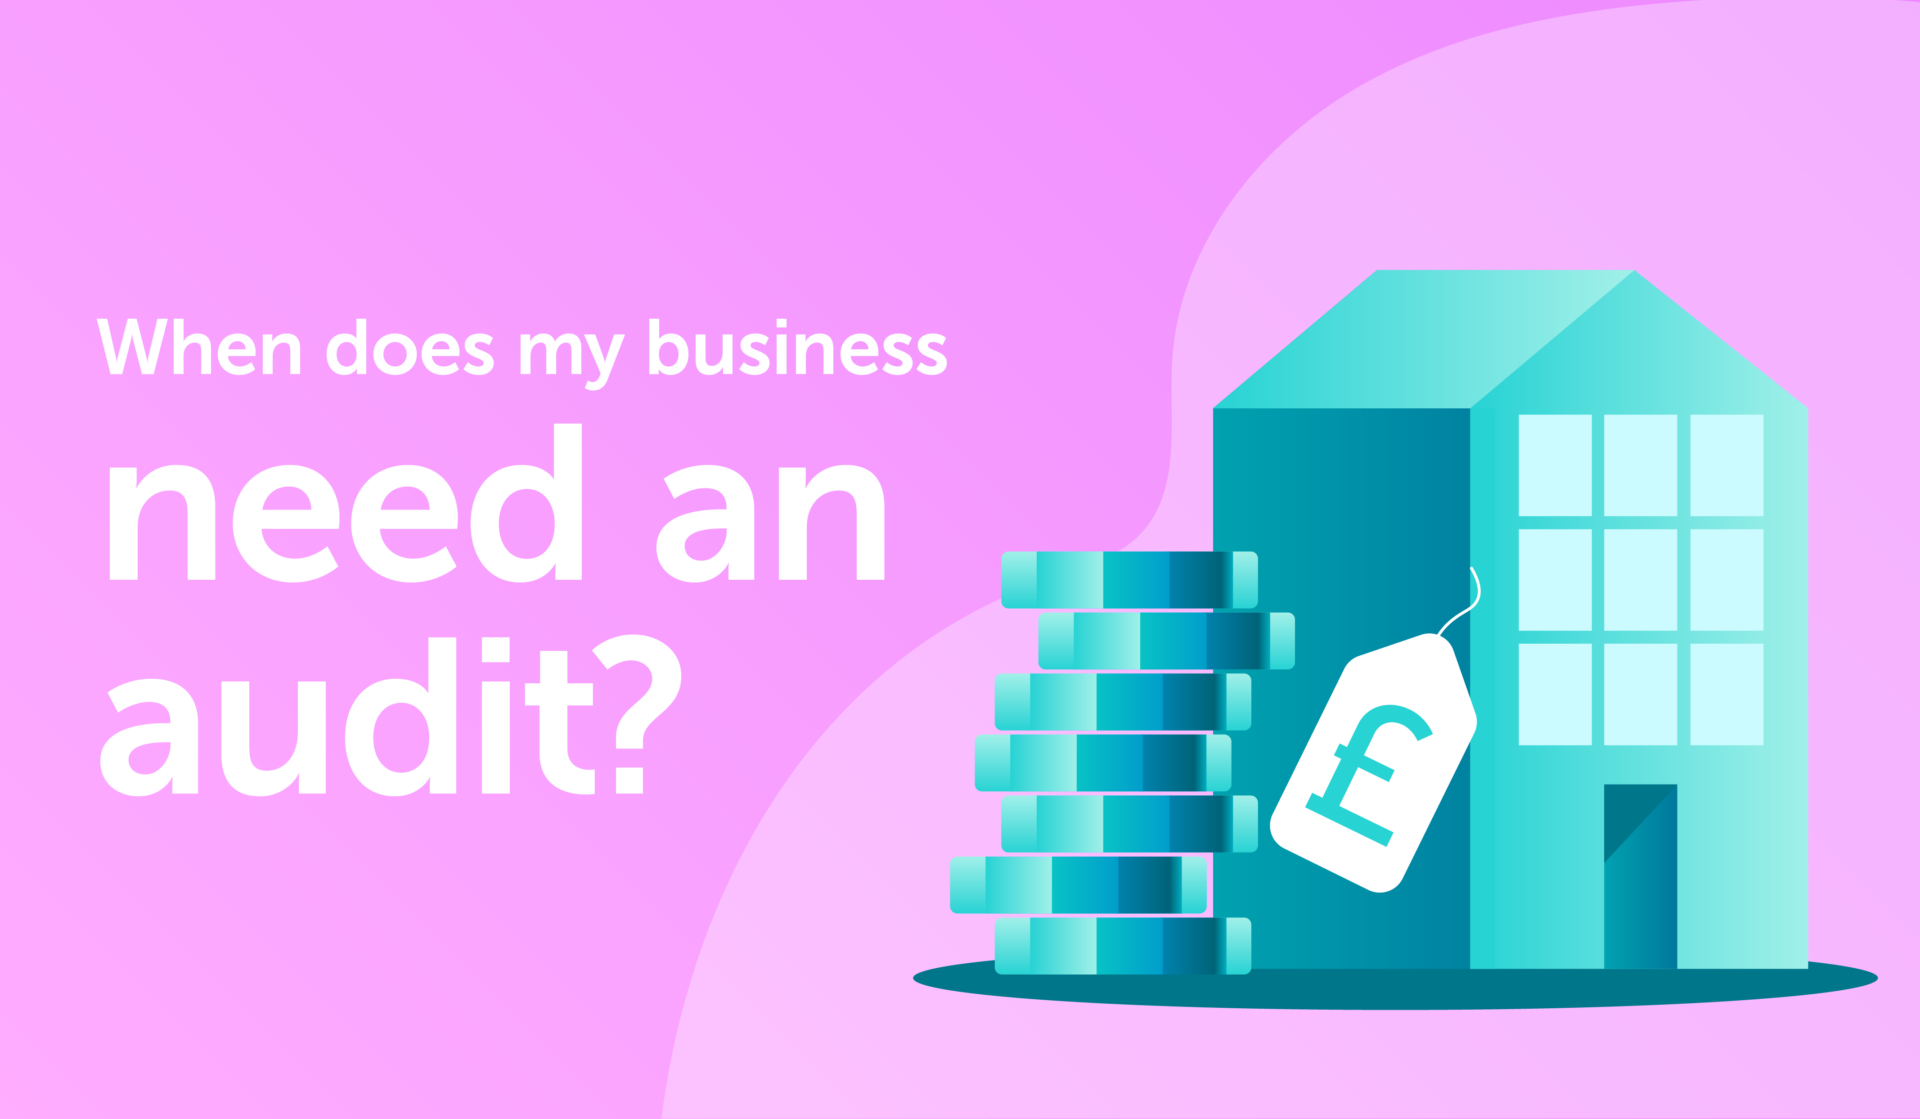 When does my business need an audit